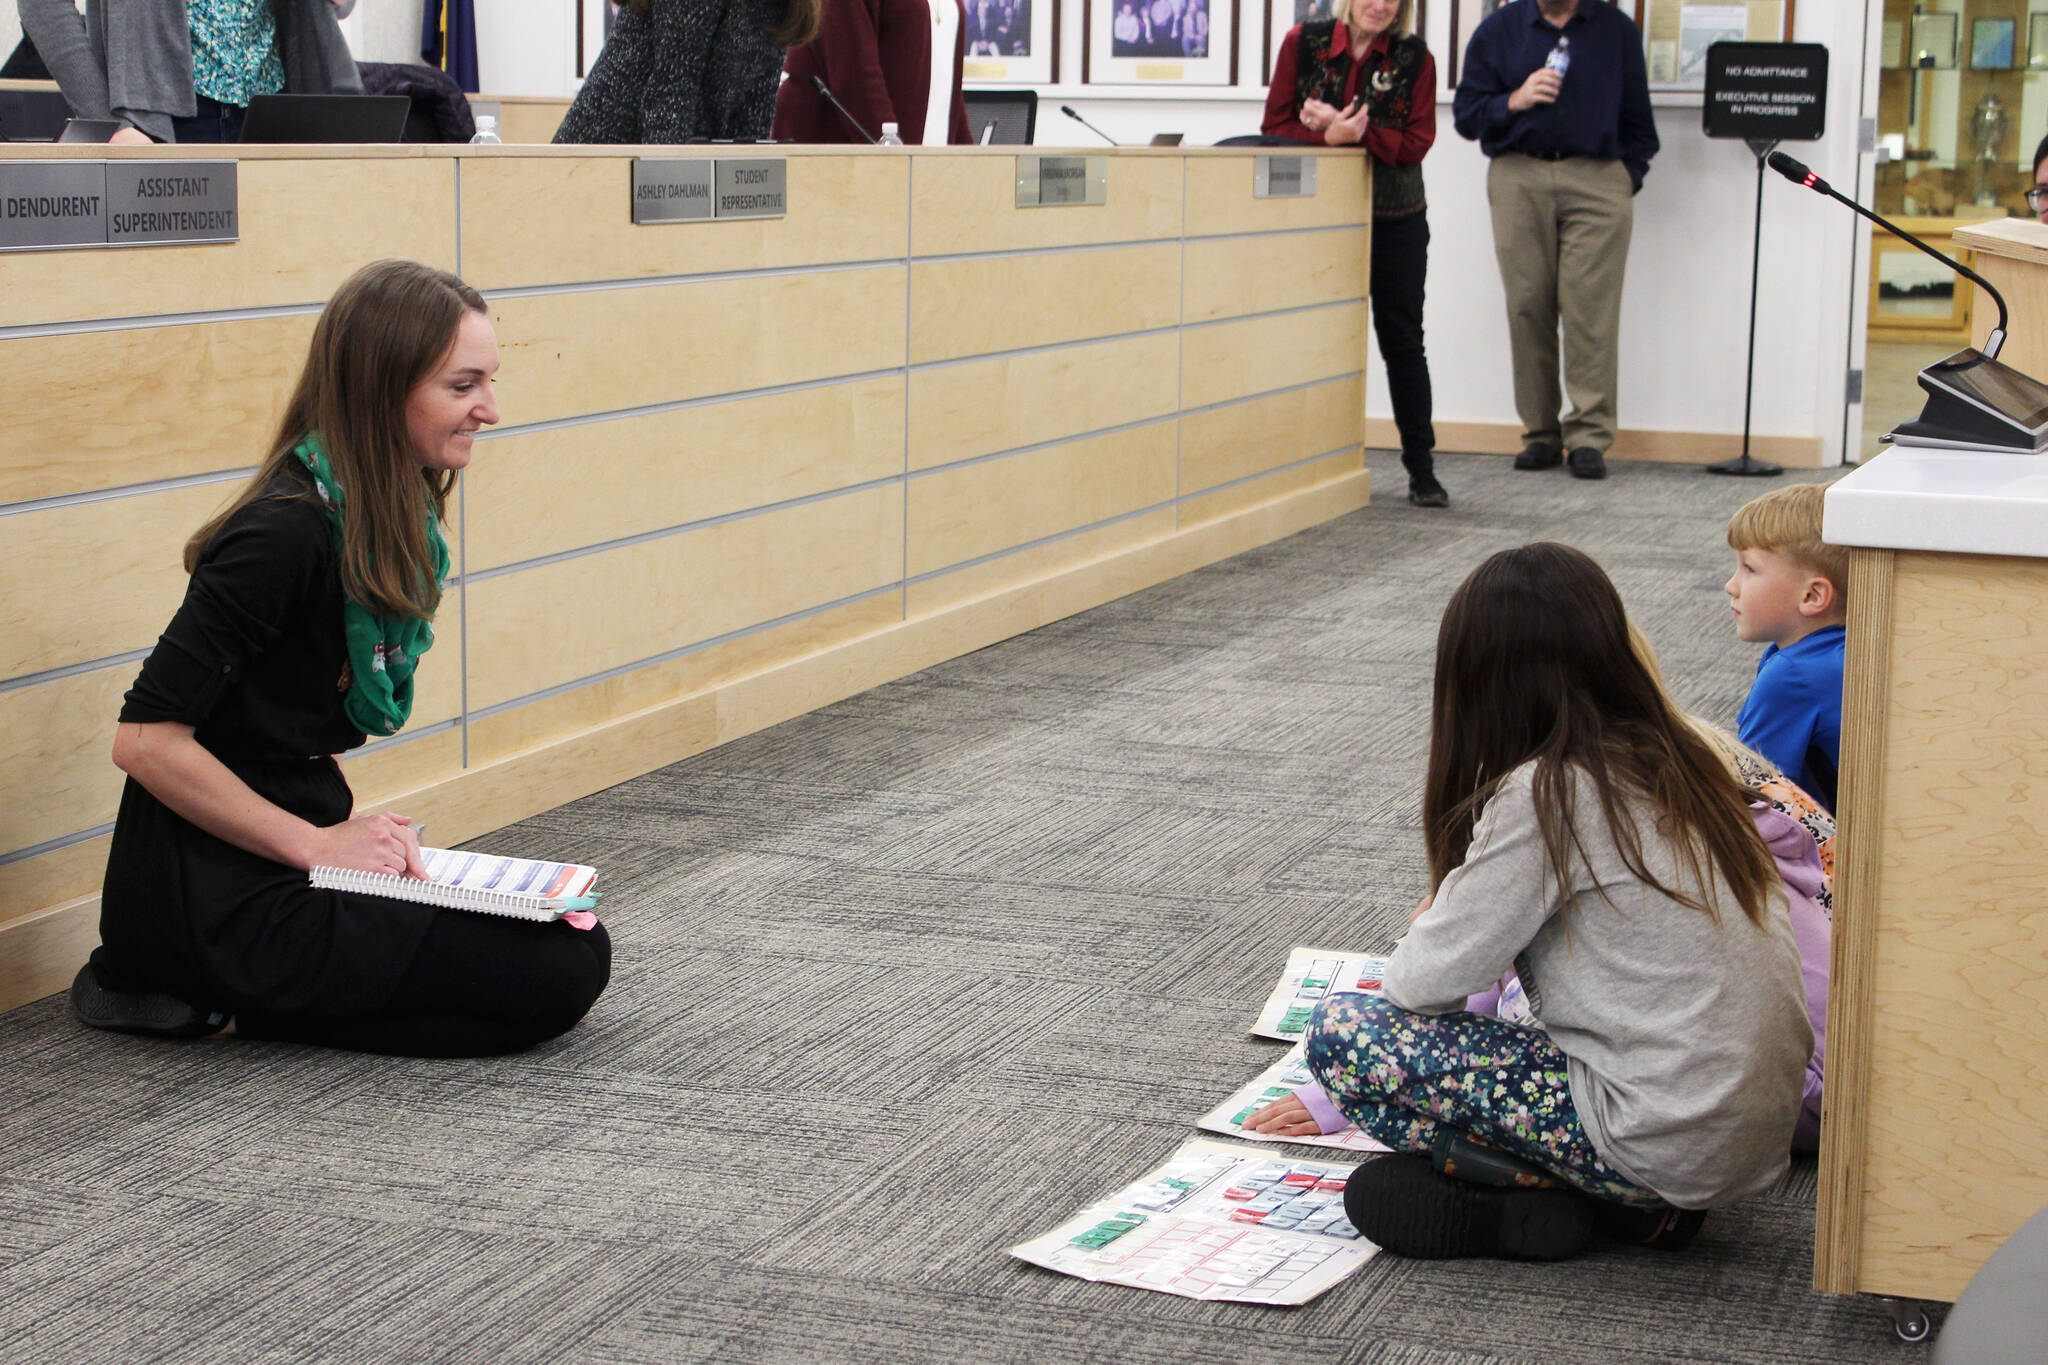 Mountain View Elementary School teacher Callie Giordano demonstrates with students “word building” with practices from the University of Florida Literacy Institute during a board of education meeting on Monday, Dec. 5, 2022, in Soldotna, Alaska. (Ashlyn O’Hara/Peninsula Clarion)